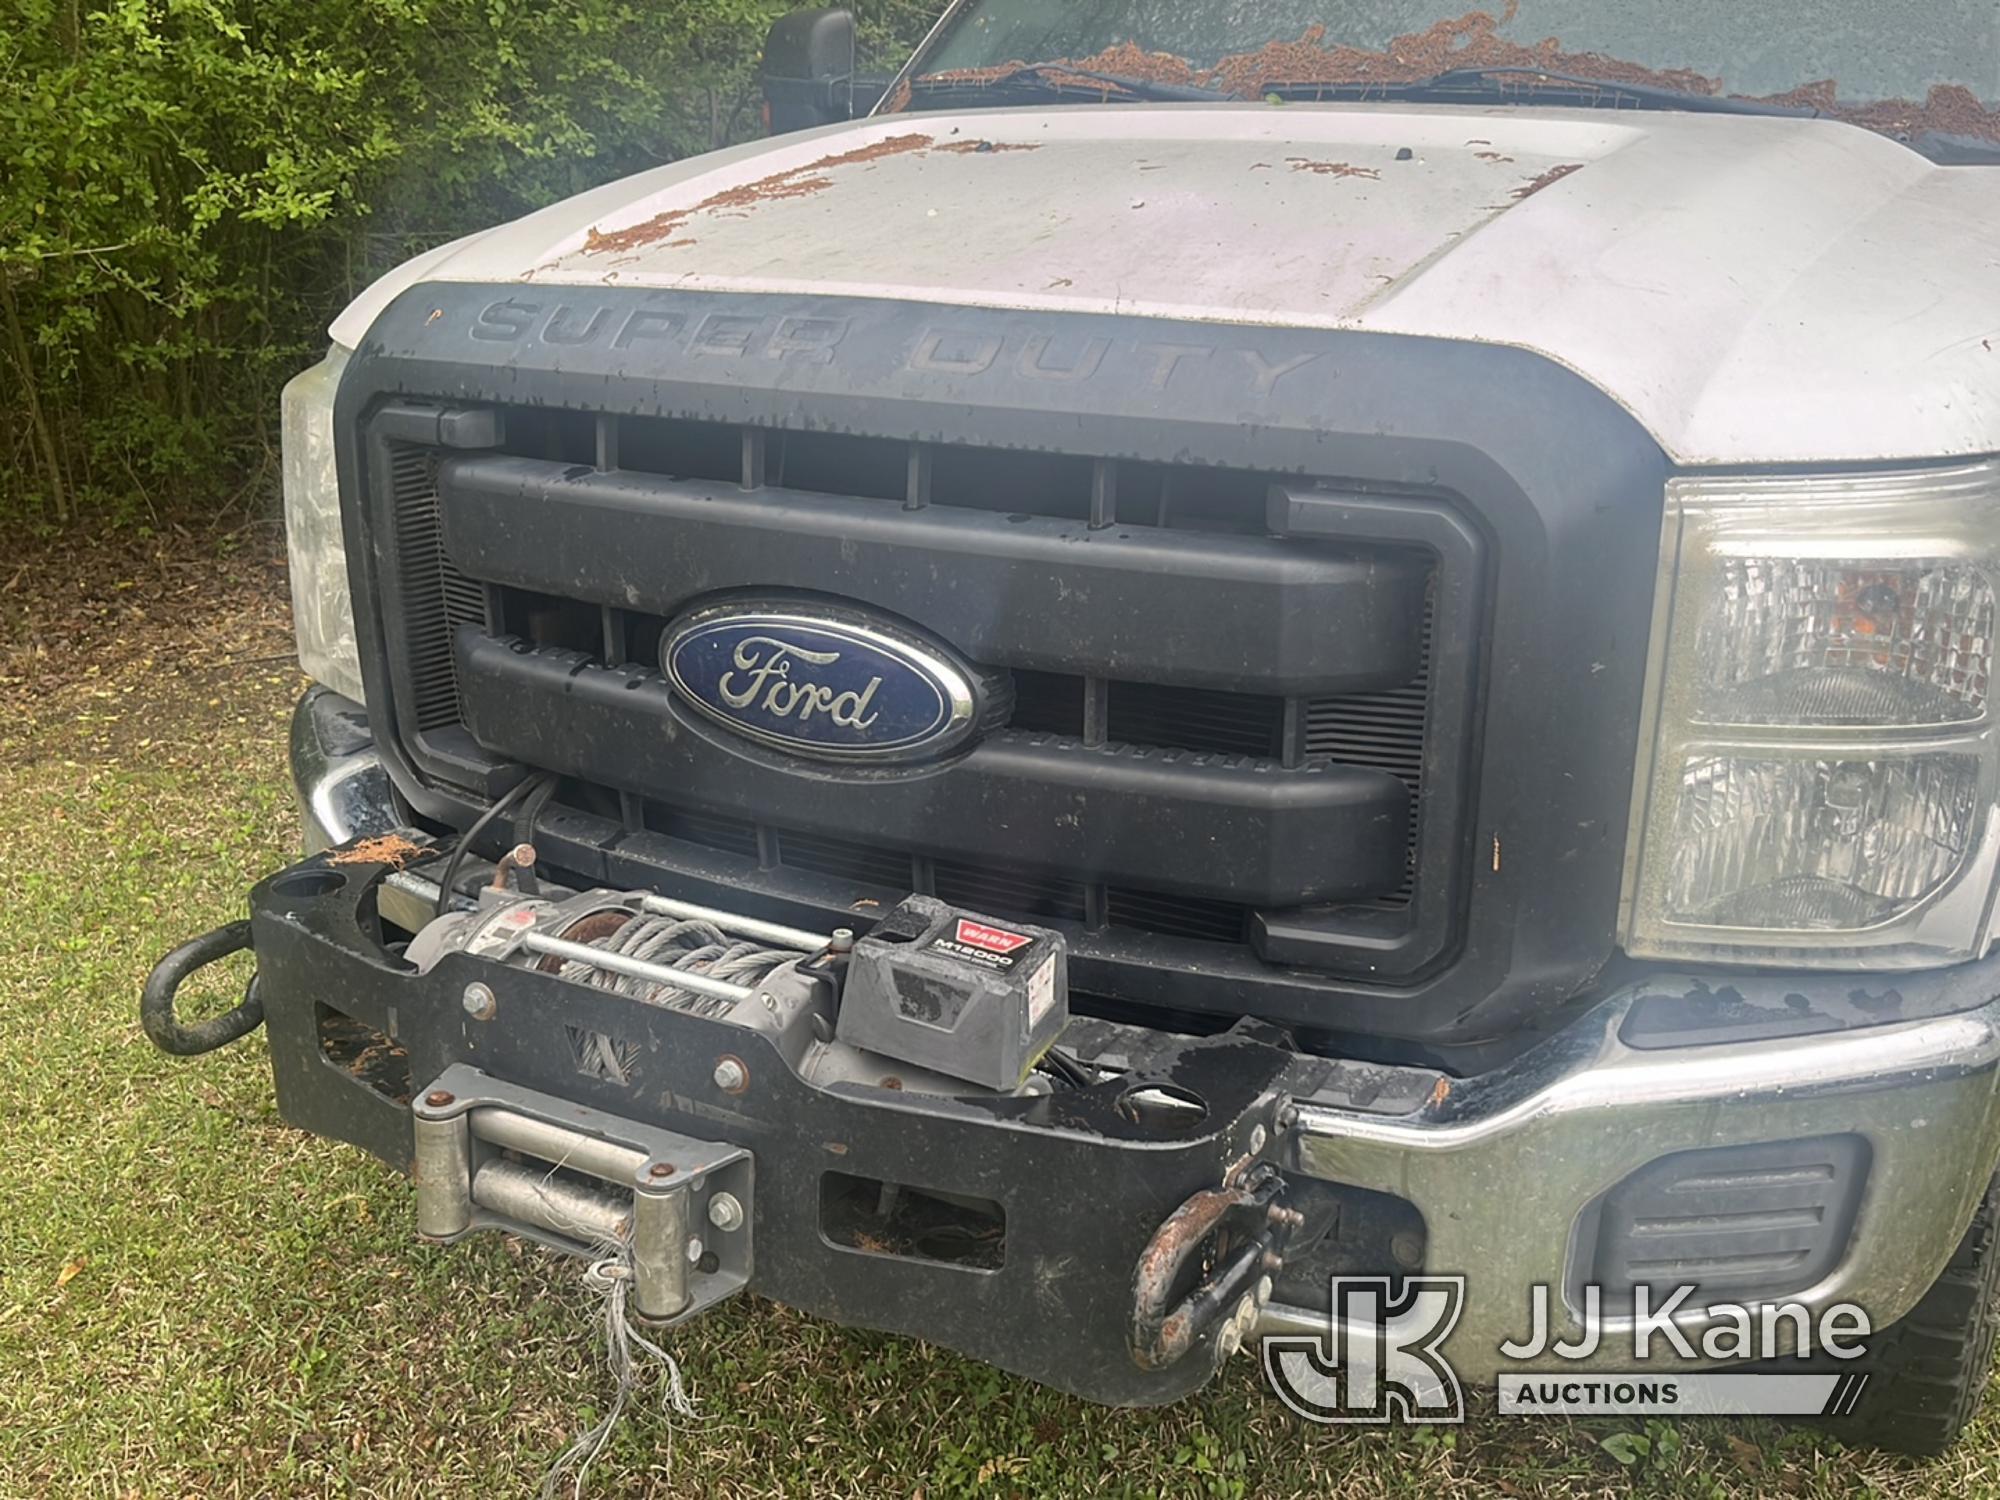 (Bennettsville, SC) 2014 Ford F250 4x4 Extended-Cab Pickup Truck Not Running & Condition Unknown) (T